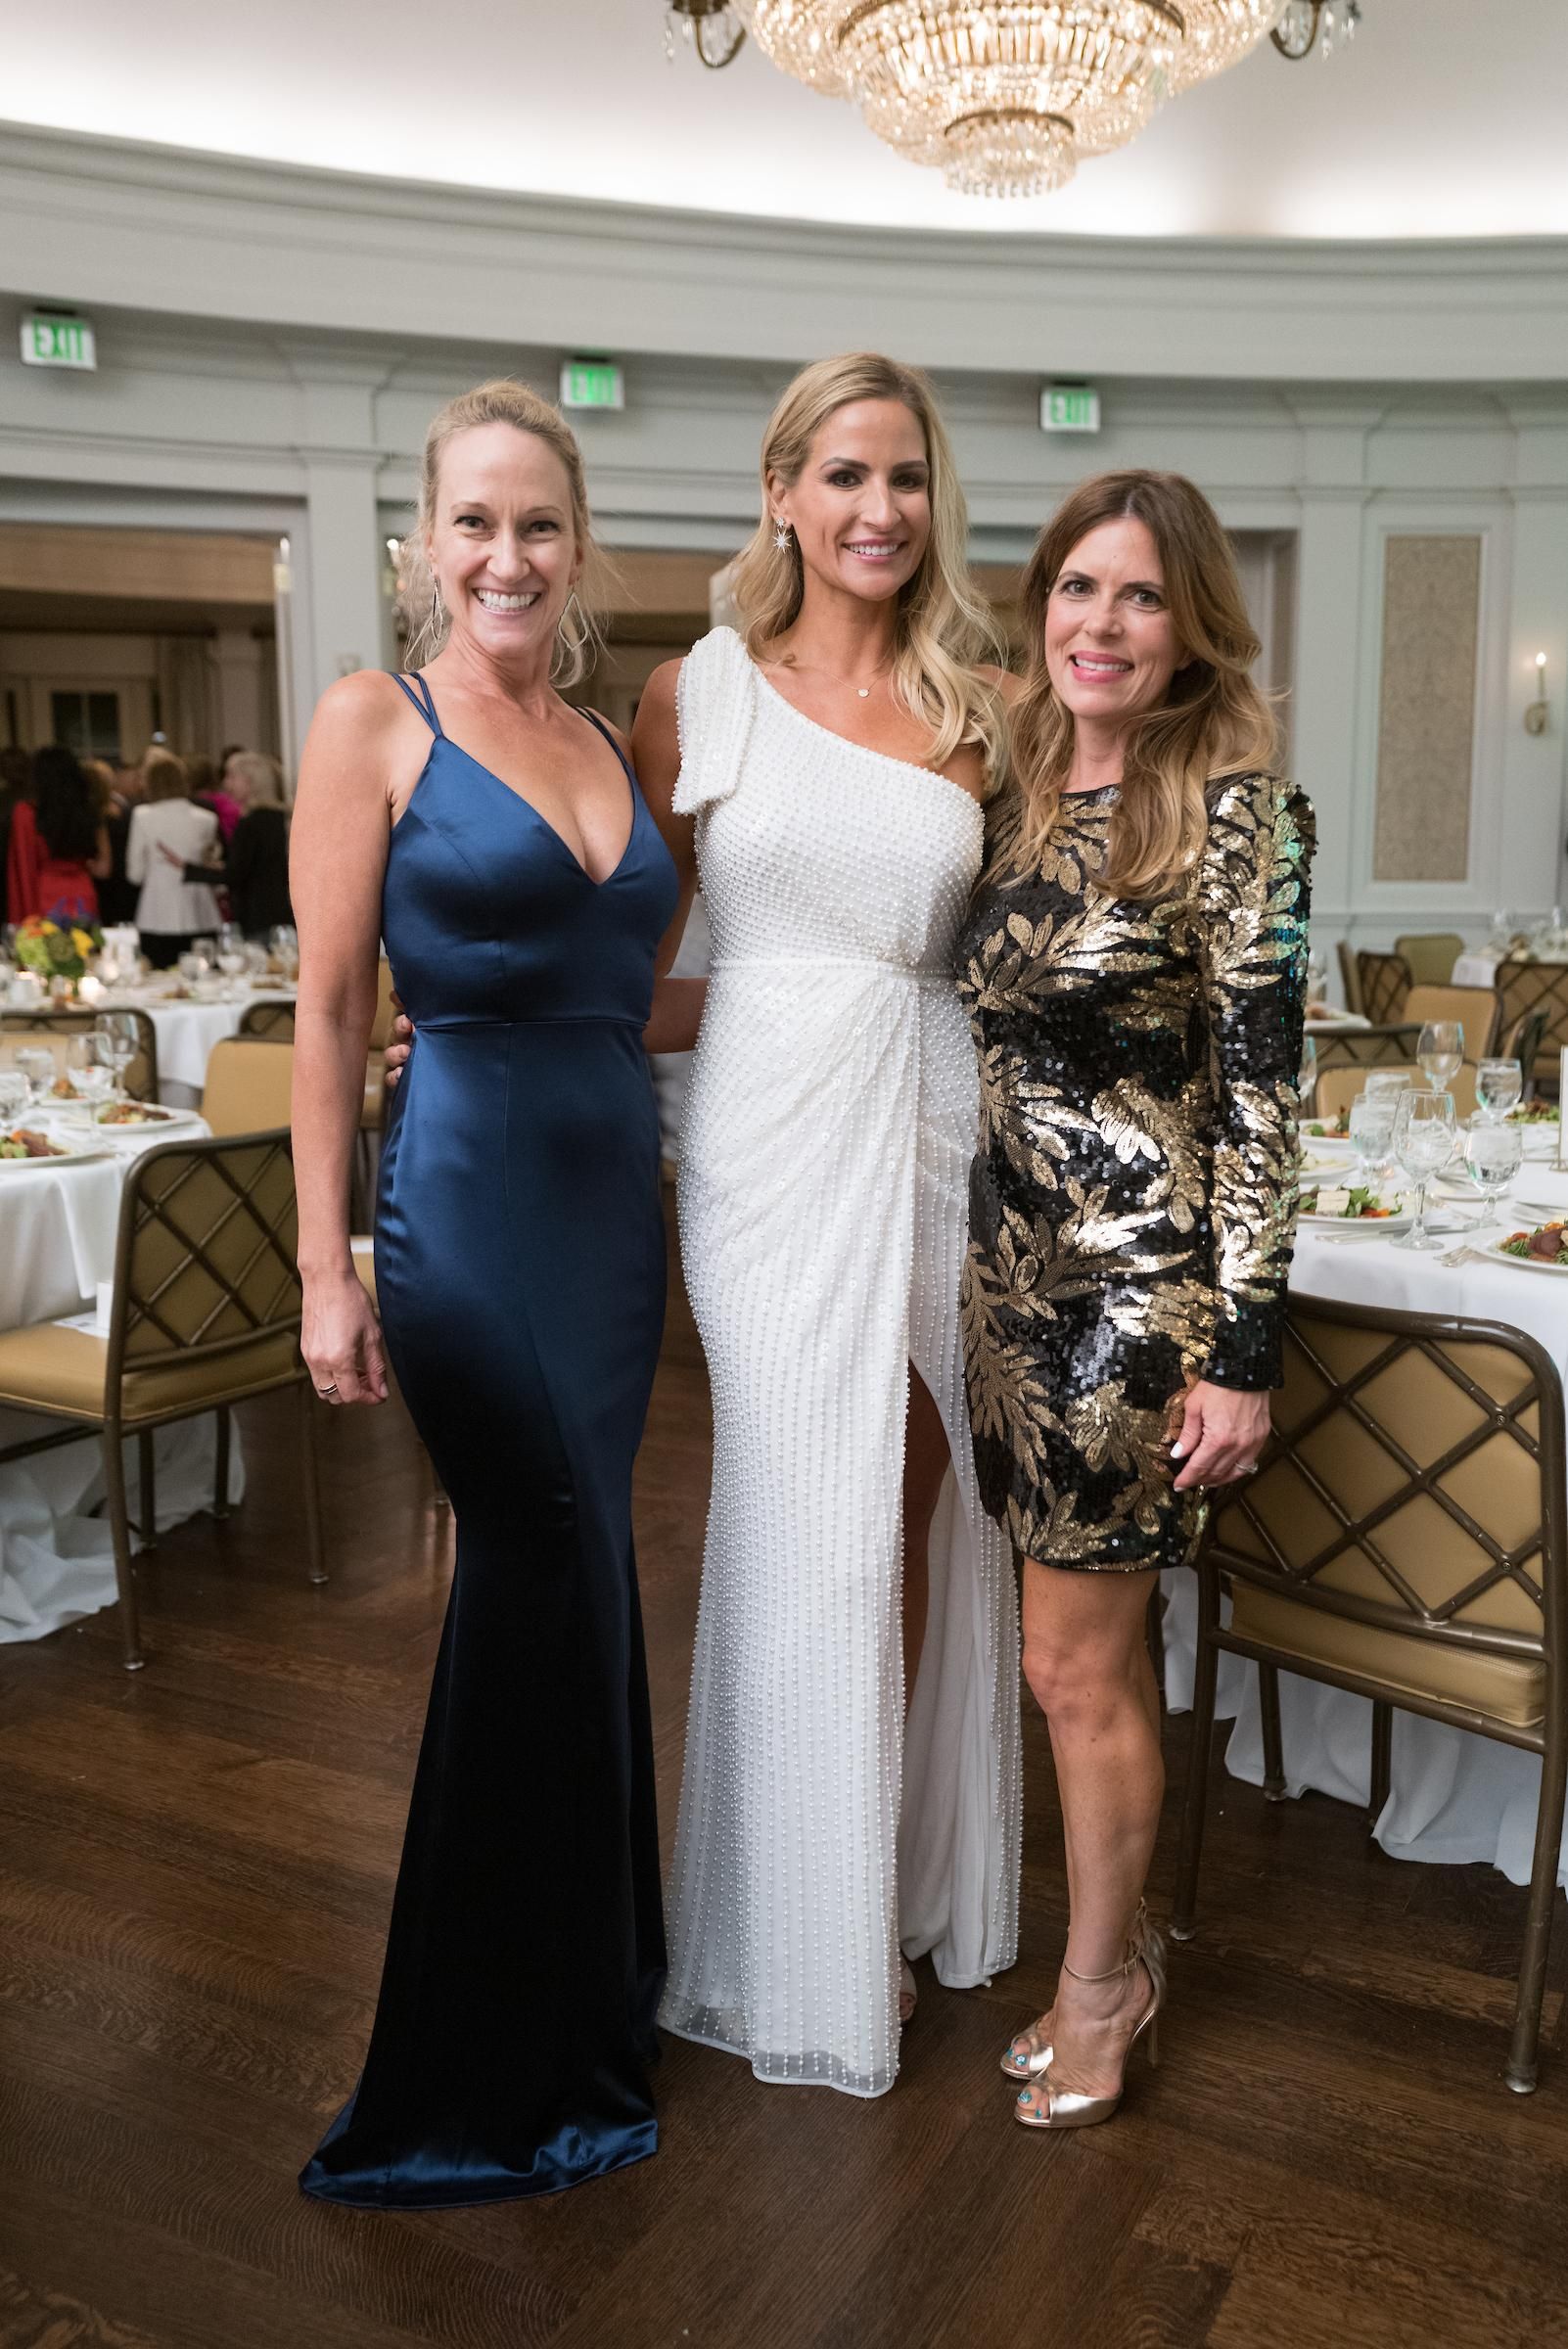 Cute Crowd Hits Glam Gala at Country Club, Raises Funds to Serve